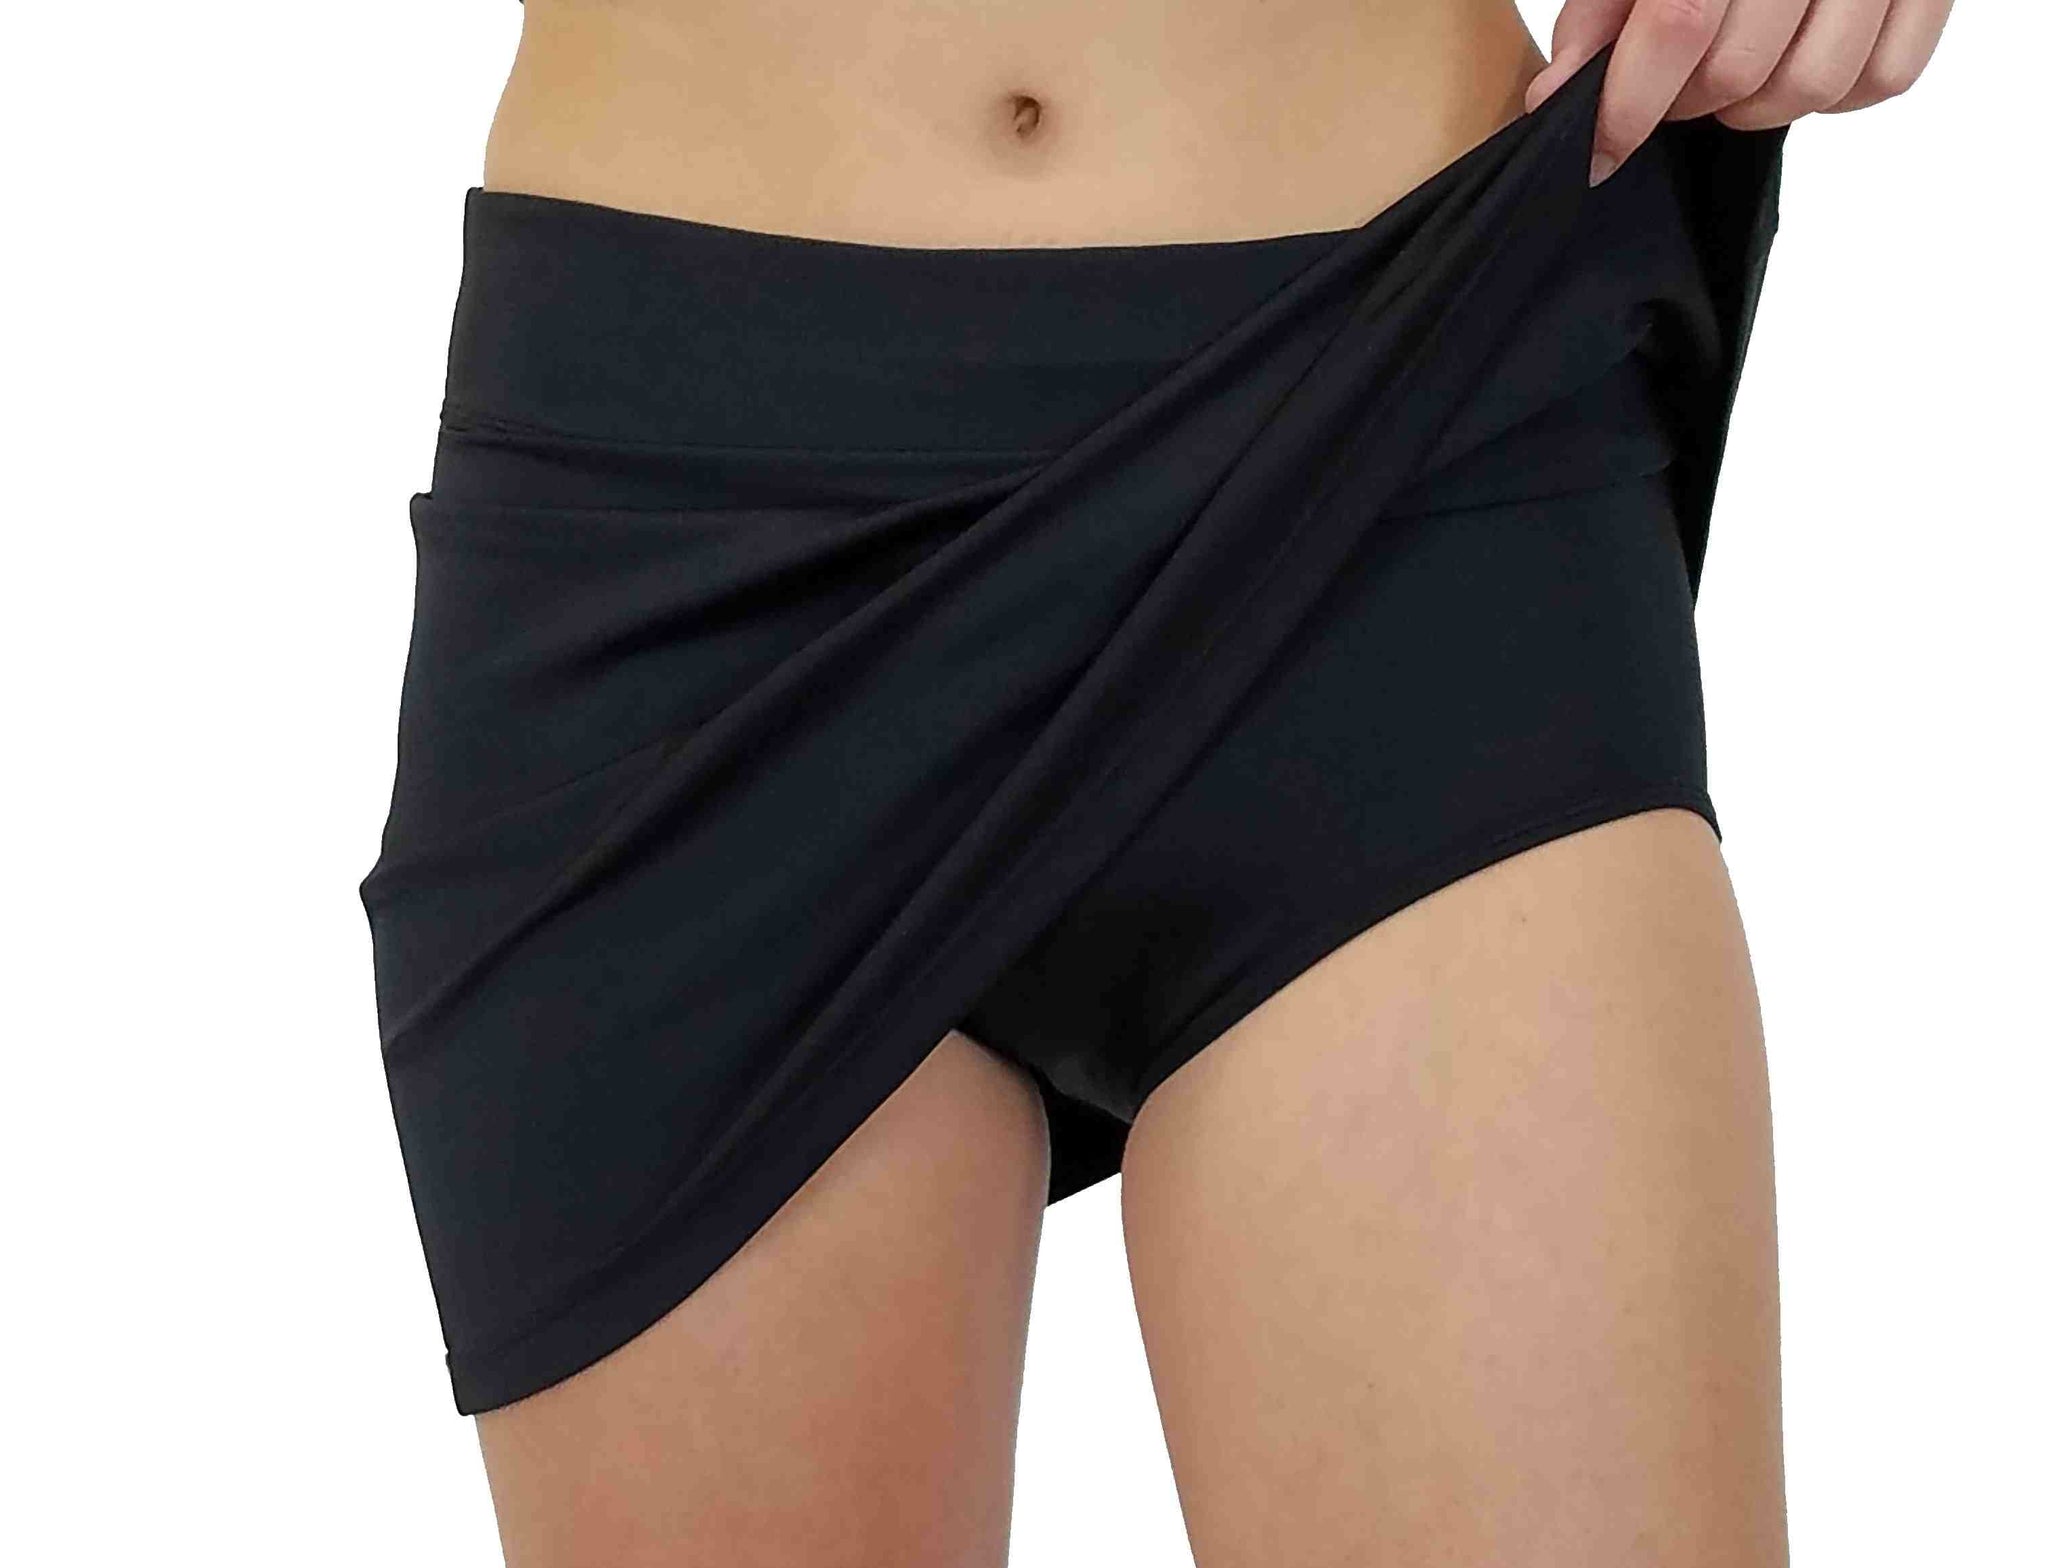 Swimwear Swim Skirt with Brief Bathing Suit Slimming Compression